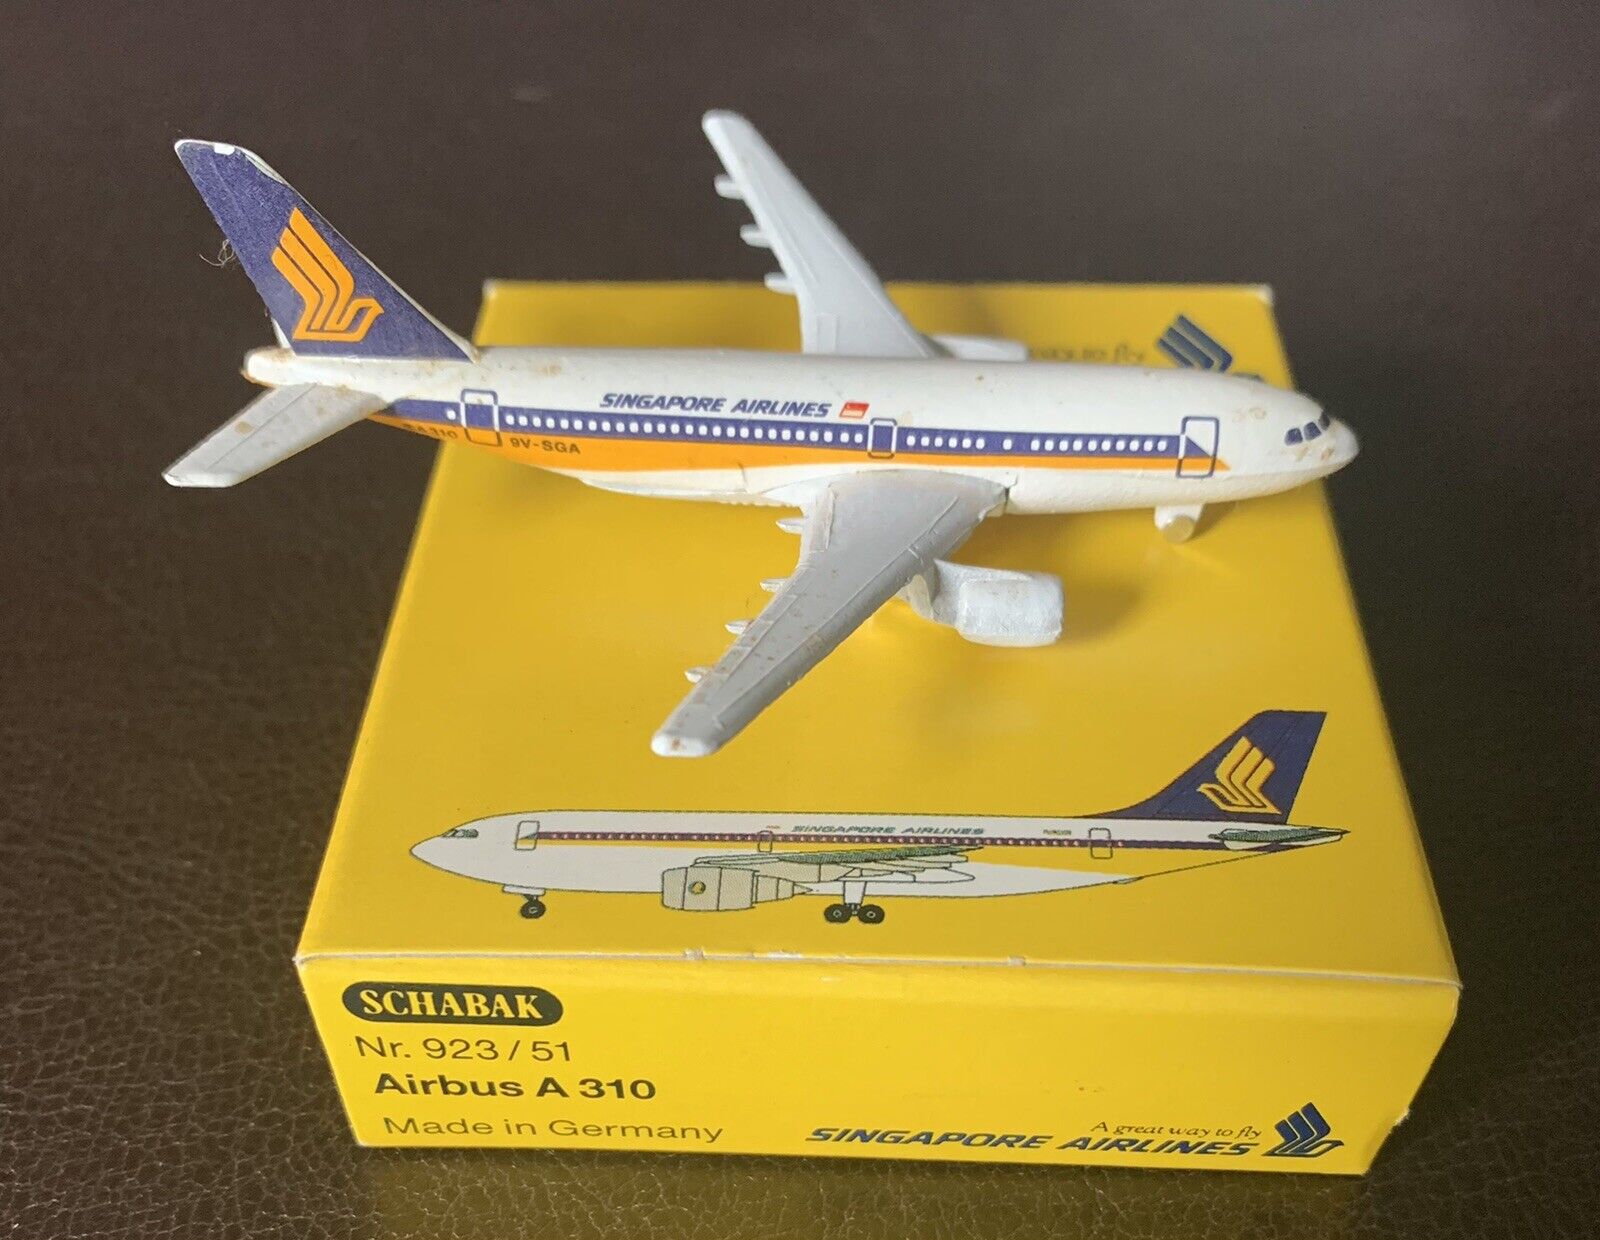 Singapore Airlines / Airbus A310 / Schabak 1:600 Scale / Excellent Condition